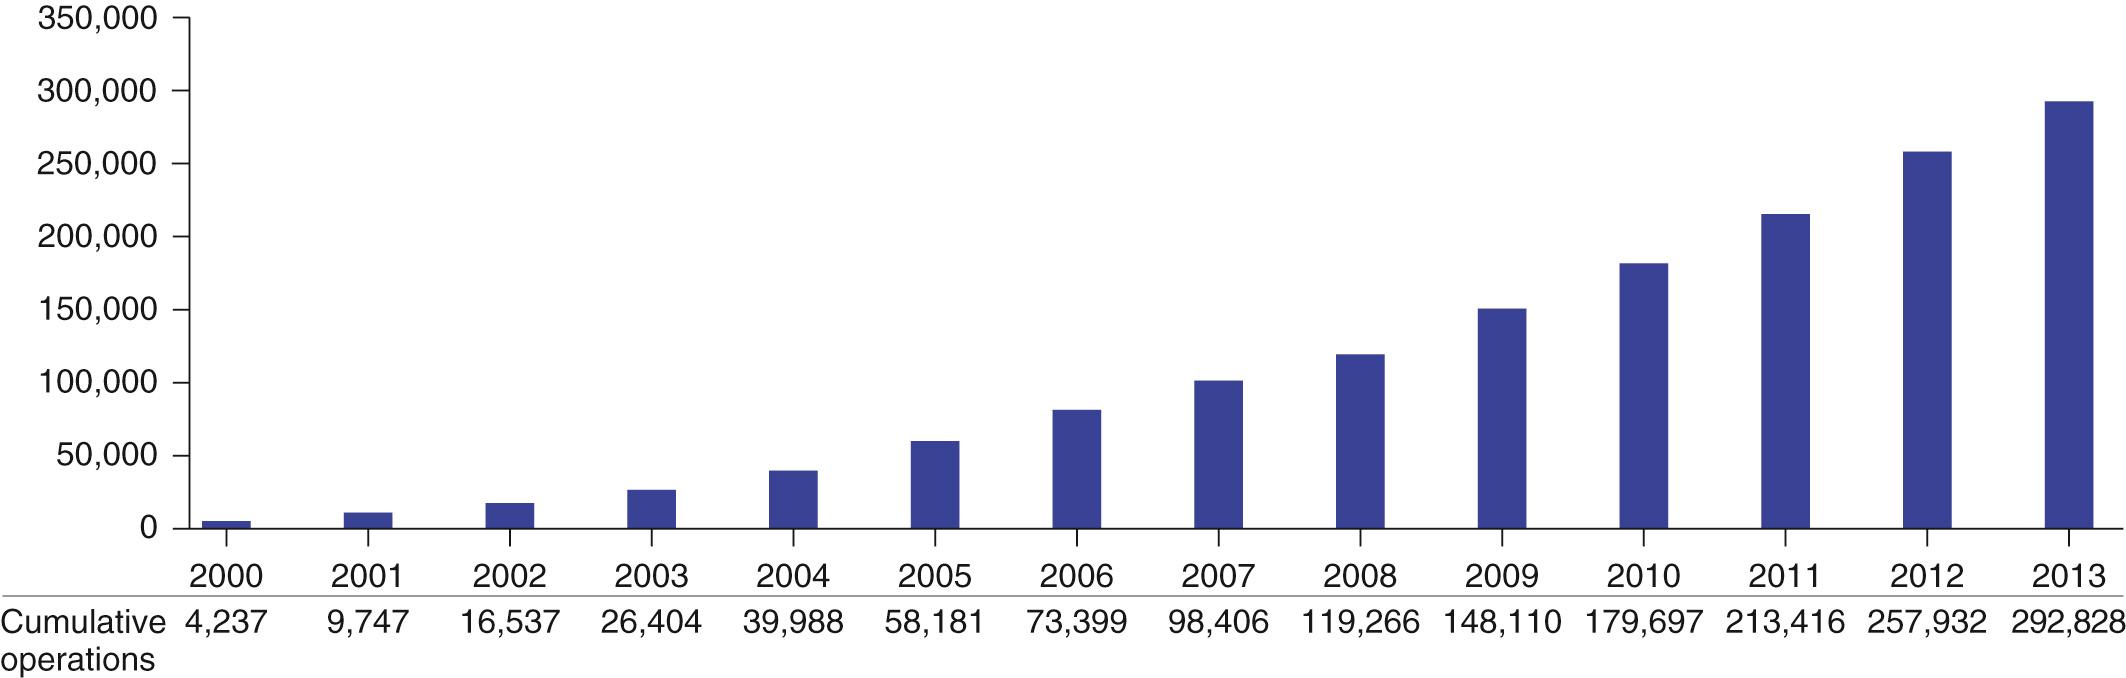 FIGURE 133-3, The annual growth of the Society of Thoracic Surgeons (STS) Congenital Heart Surgery Database by the cumulative number of operations over time. As of January 1, 2014, the number of cumulative total operations in the STS Congenital Heart Surgery Database is 292,828. The aggregate report from the Fall 2013 Harvest of the STS Congenital Heart Surgery Database 19 includes 136,617 operations performed in the 4-year period of July 1, 2009, to June 30, 2013, inclusive, submitted from 120 hospitals in North America—117 in the United States and 3 in Canada.